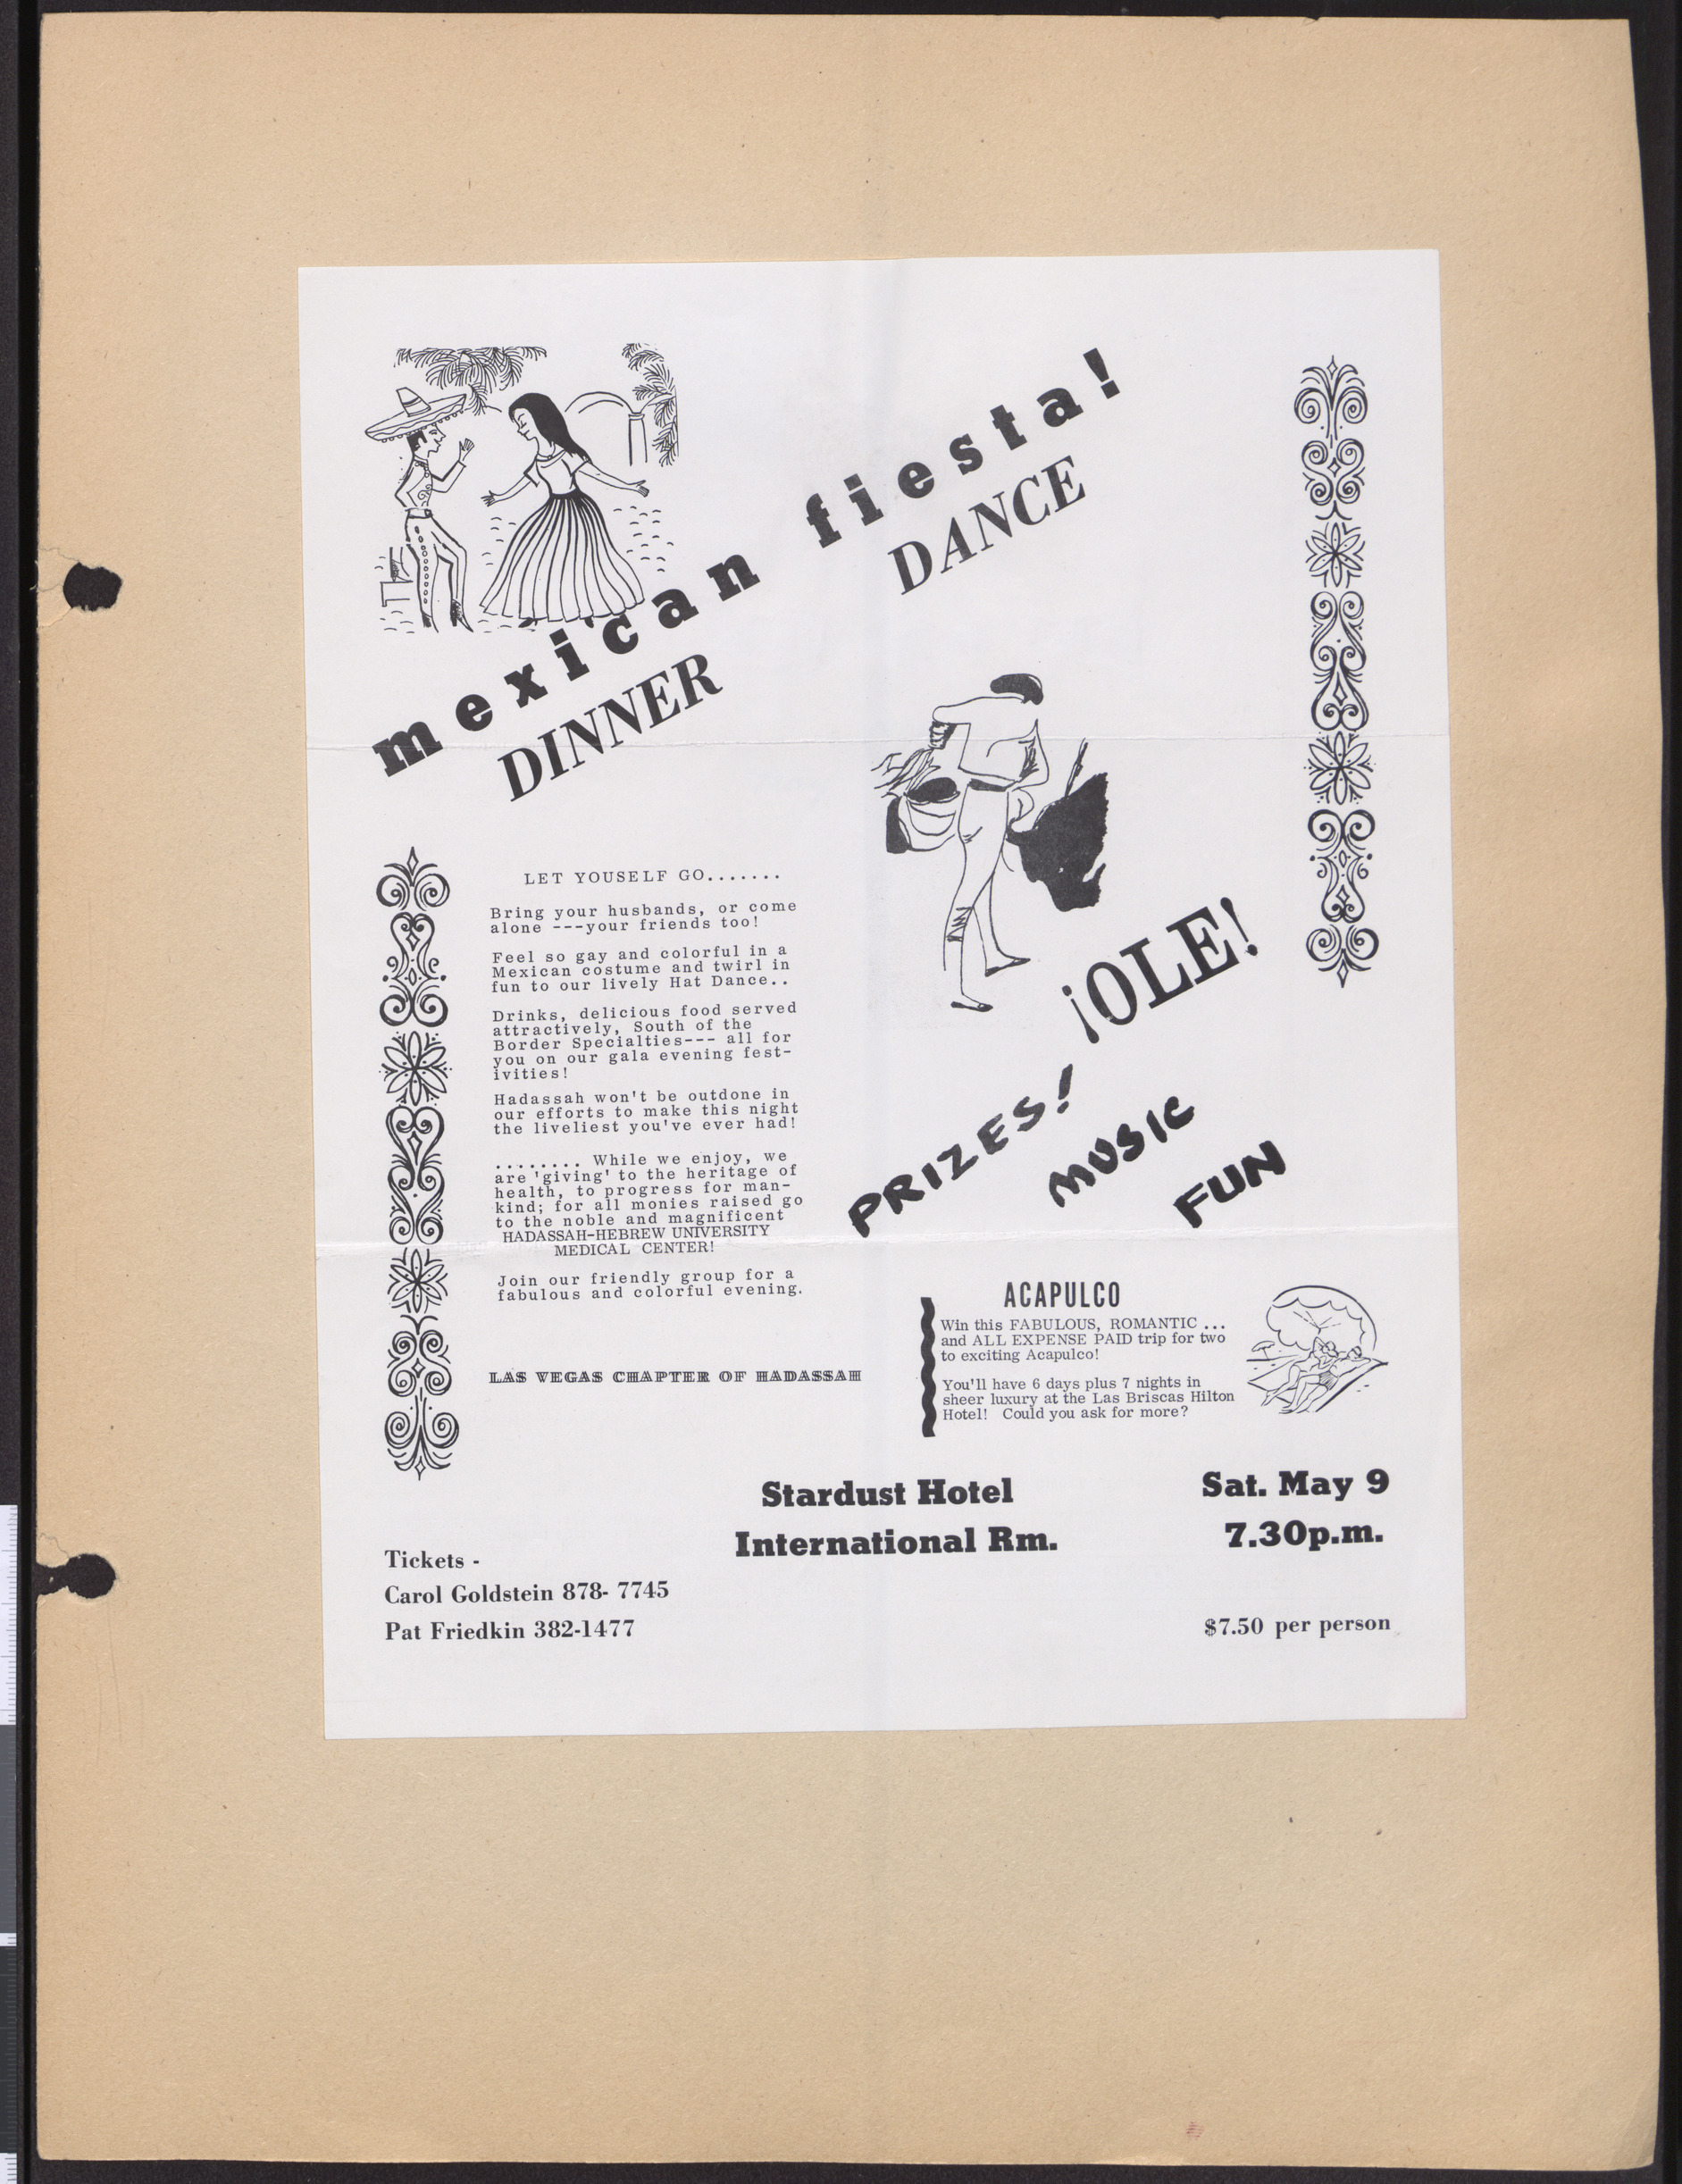 Event flyer for Mexican fiesta!, May 9, 1964